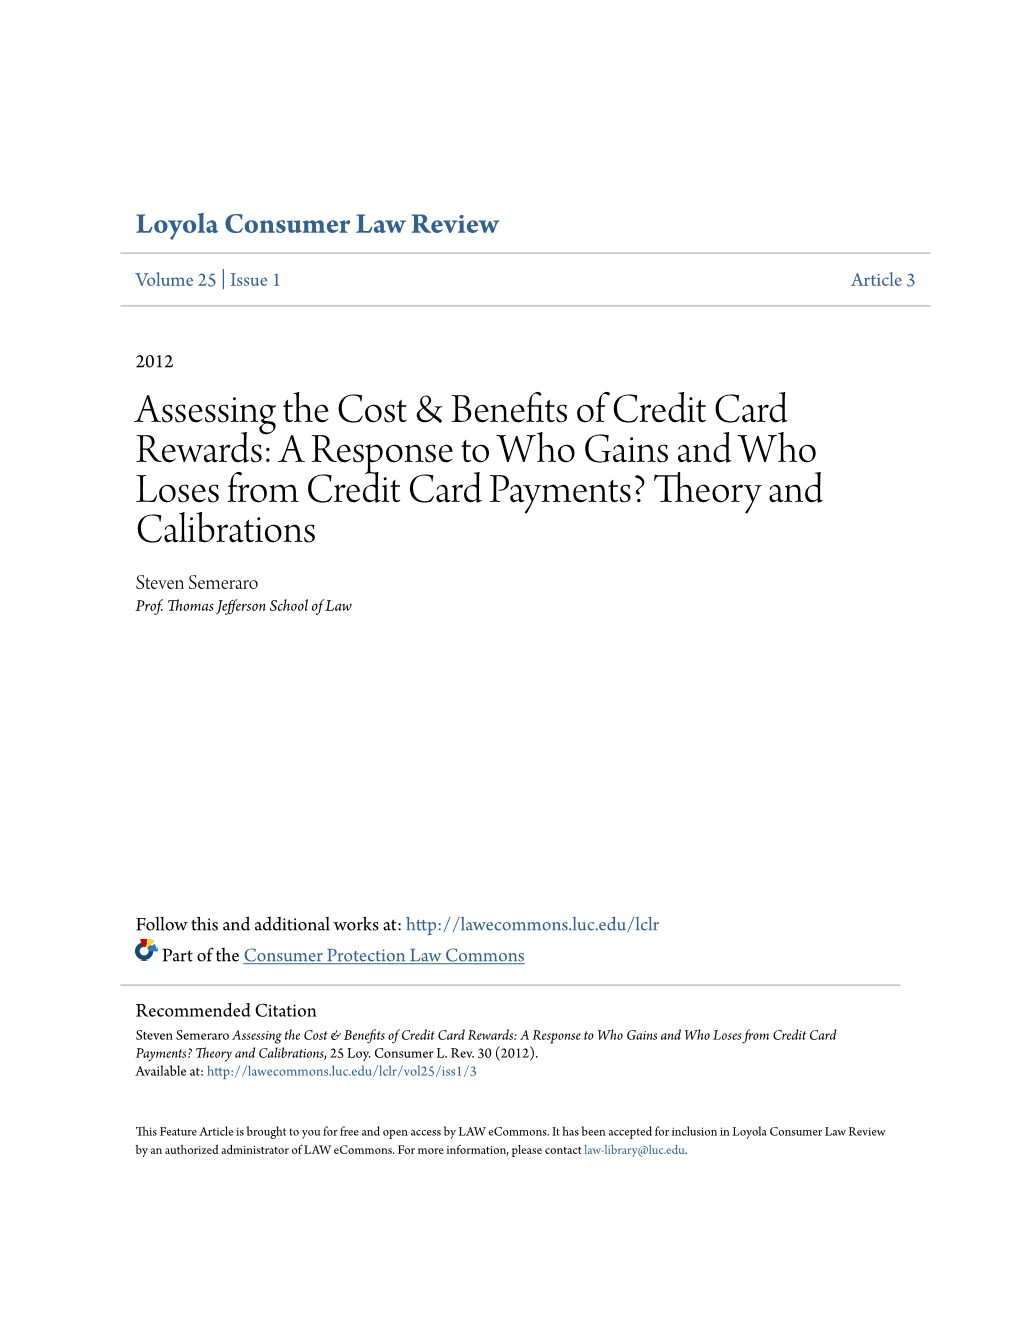 Assessing the Cost & Benefits of Credit Card